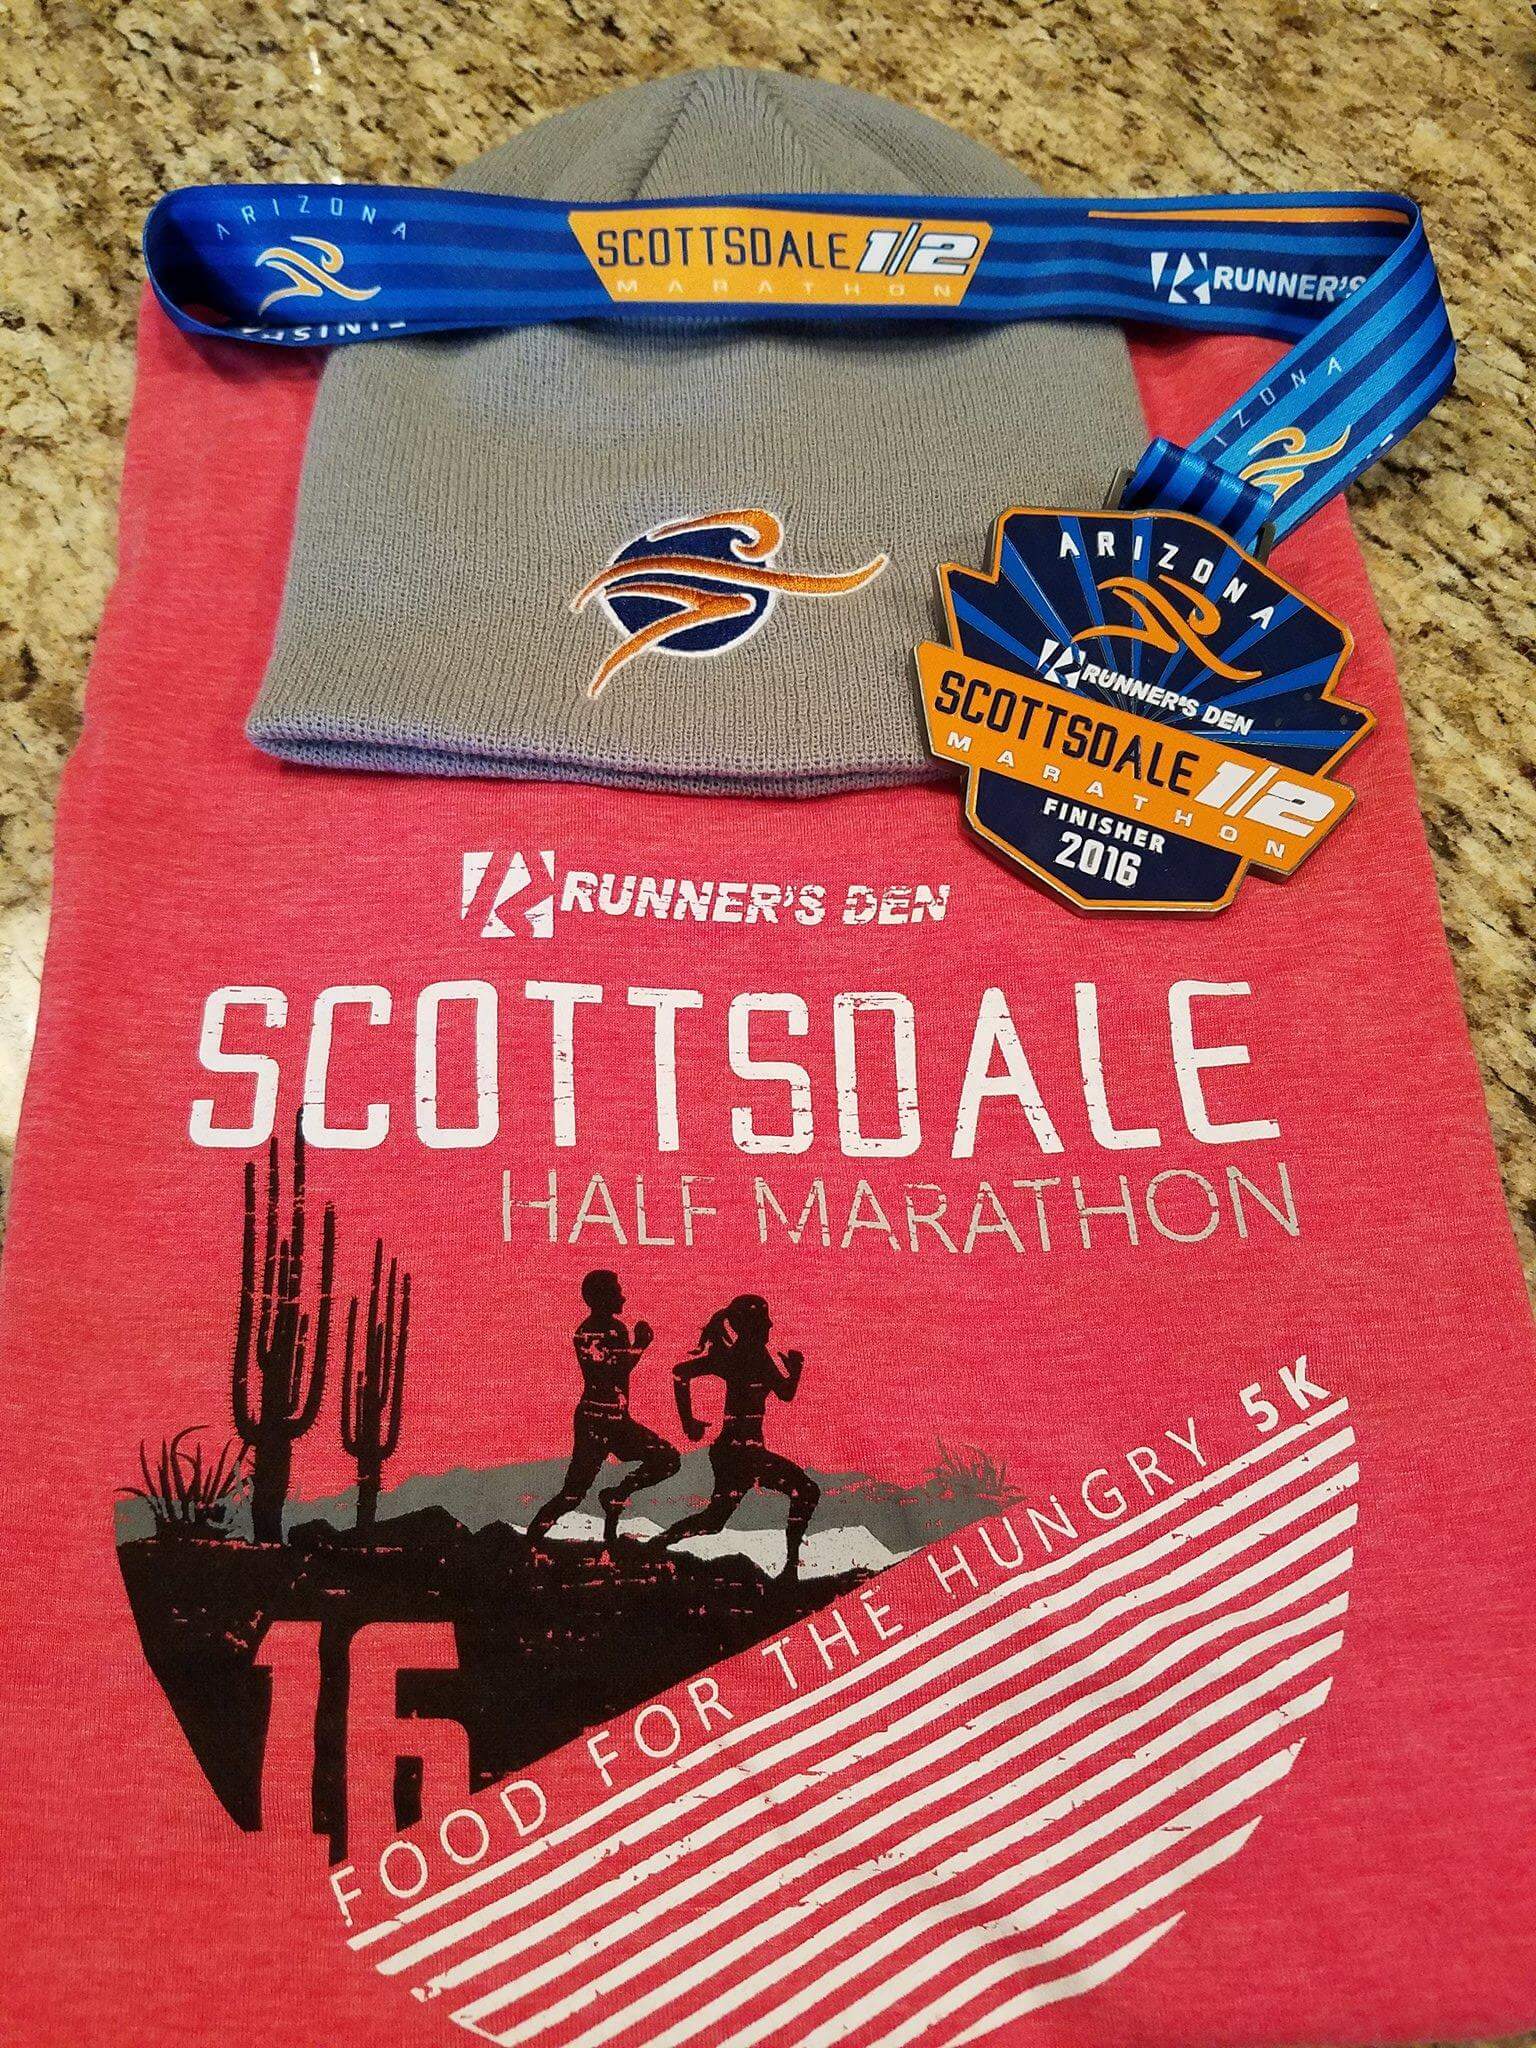 This race was a steal at $45 (early registration). Gender specific tee and beanie ftw!